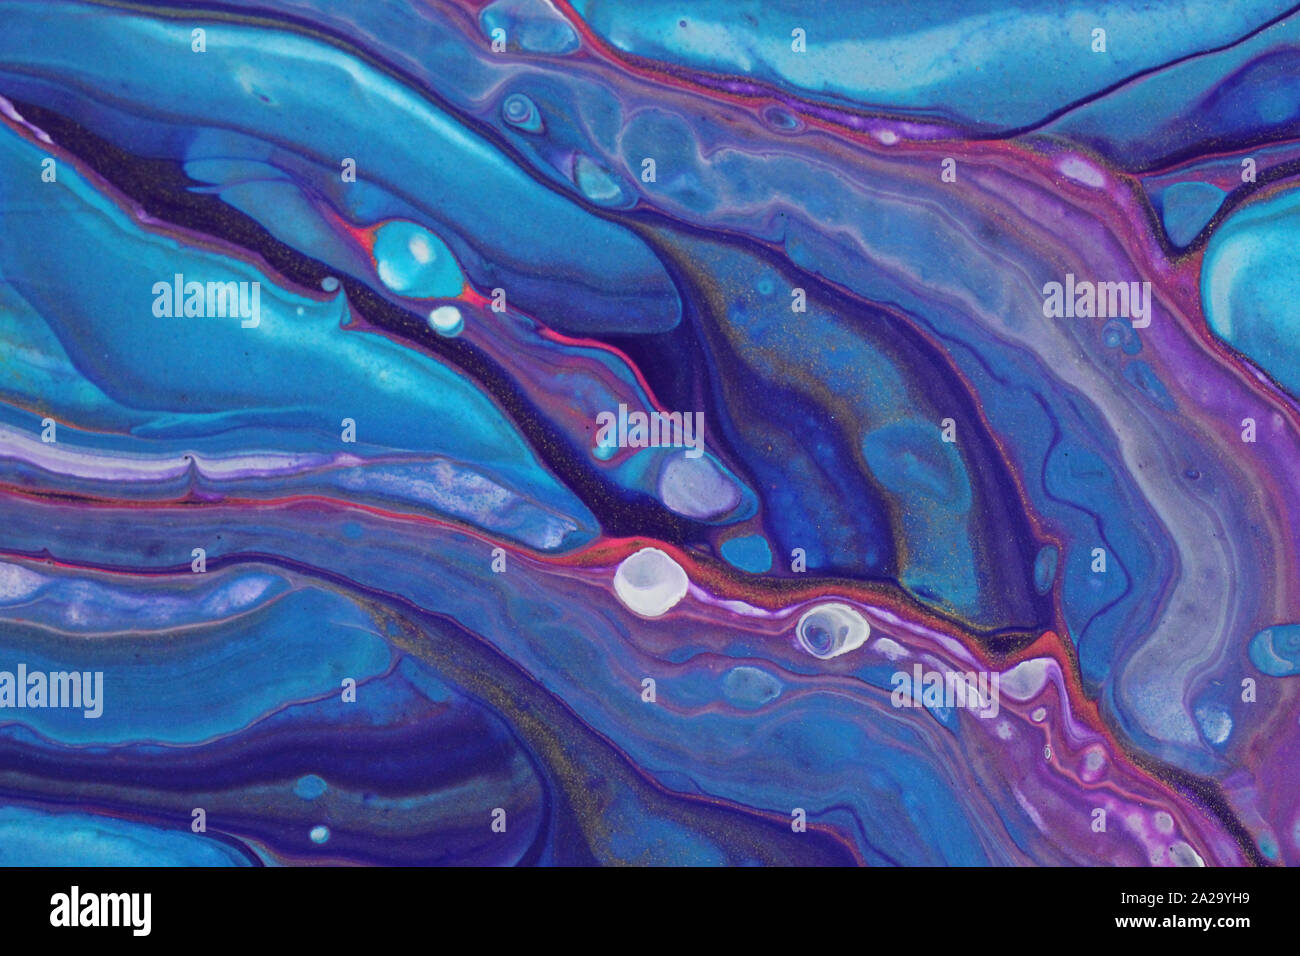 A raging tempest of tentacles star in this abstract stormy sea acrylic painting for backgrounds. Stock Photo